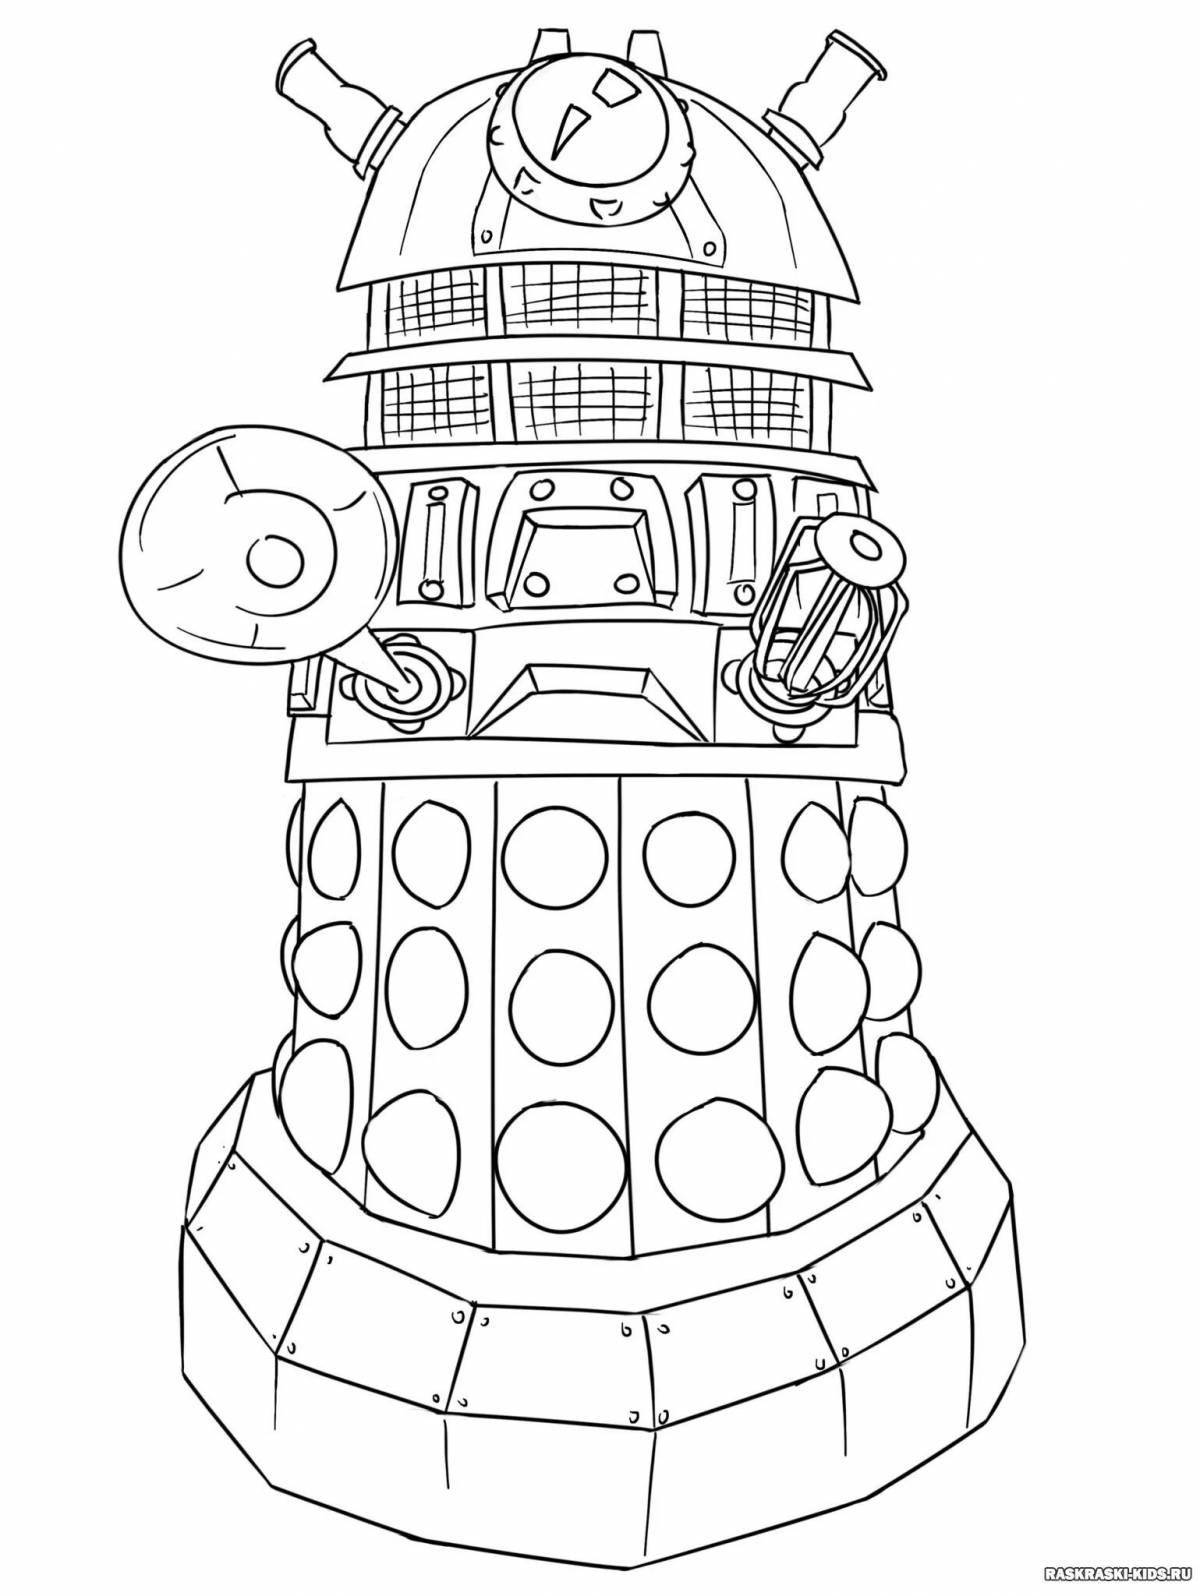 Shining doctor who coloring book